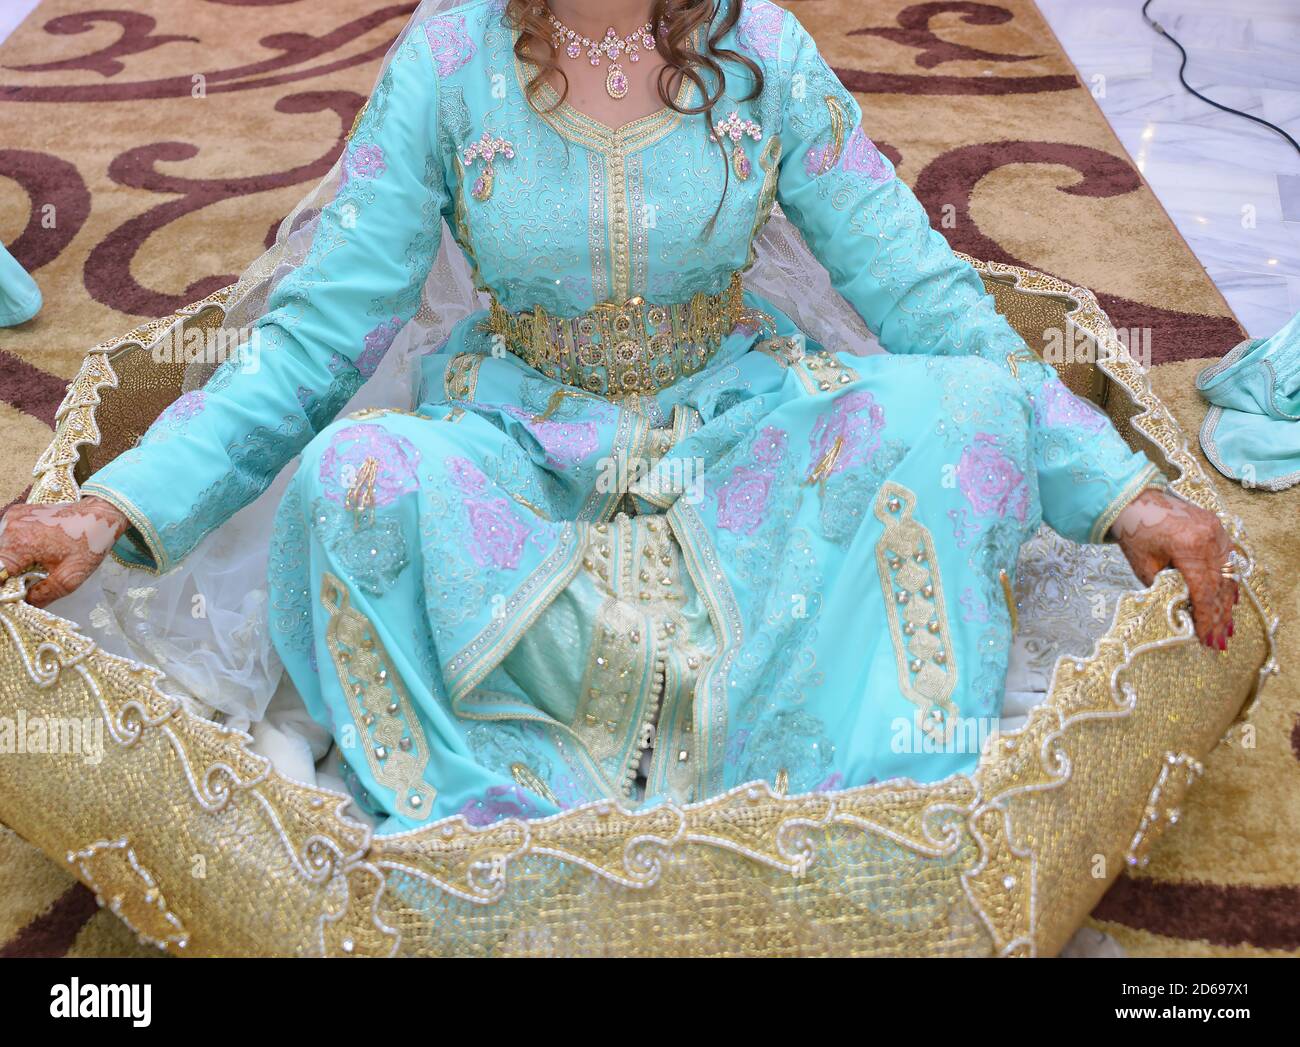 The traditional dress of the Moroccan bride. Beautiful bride wearing Moroccan caftan and precious jewelry Stock Photo